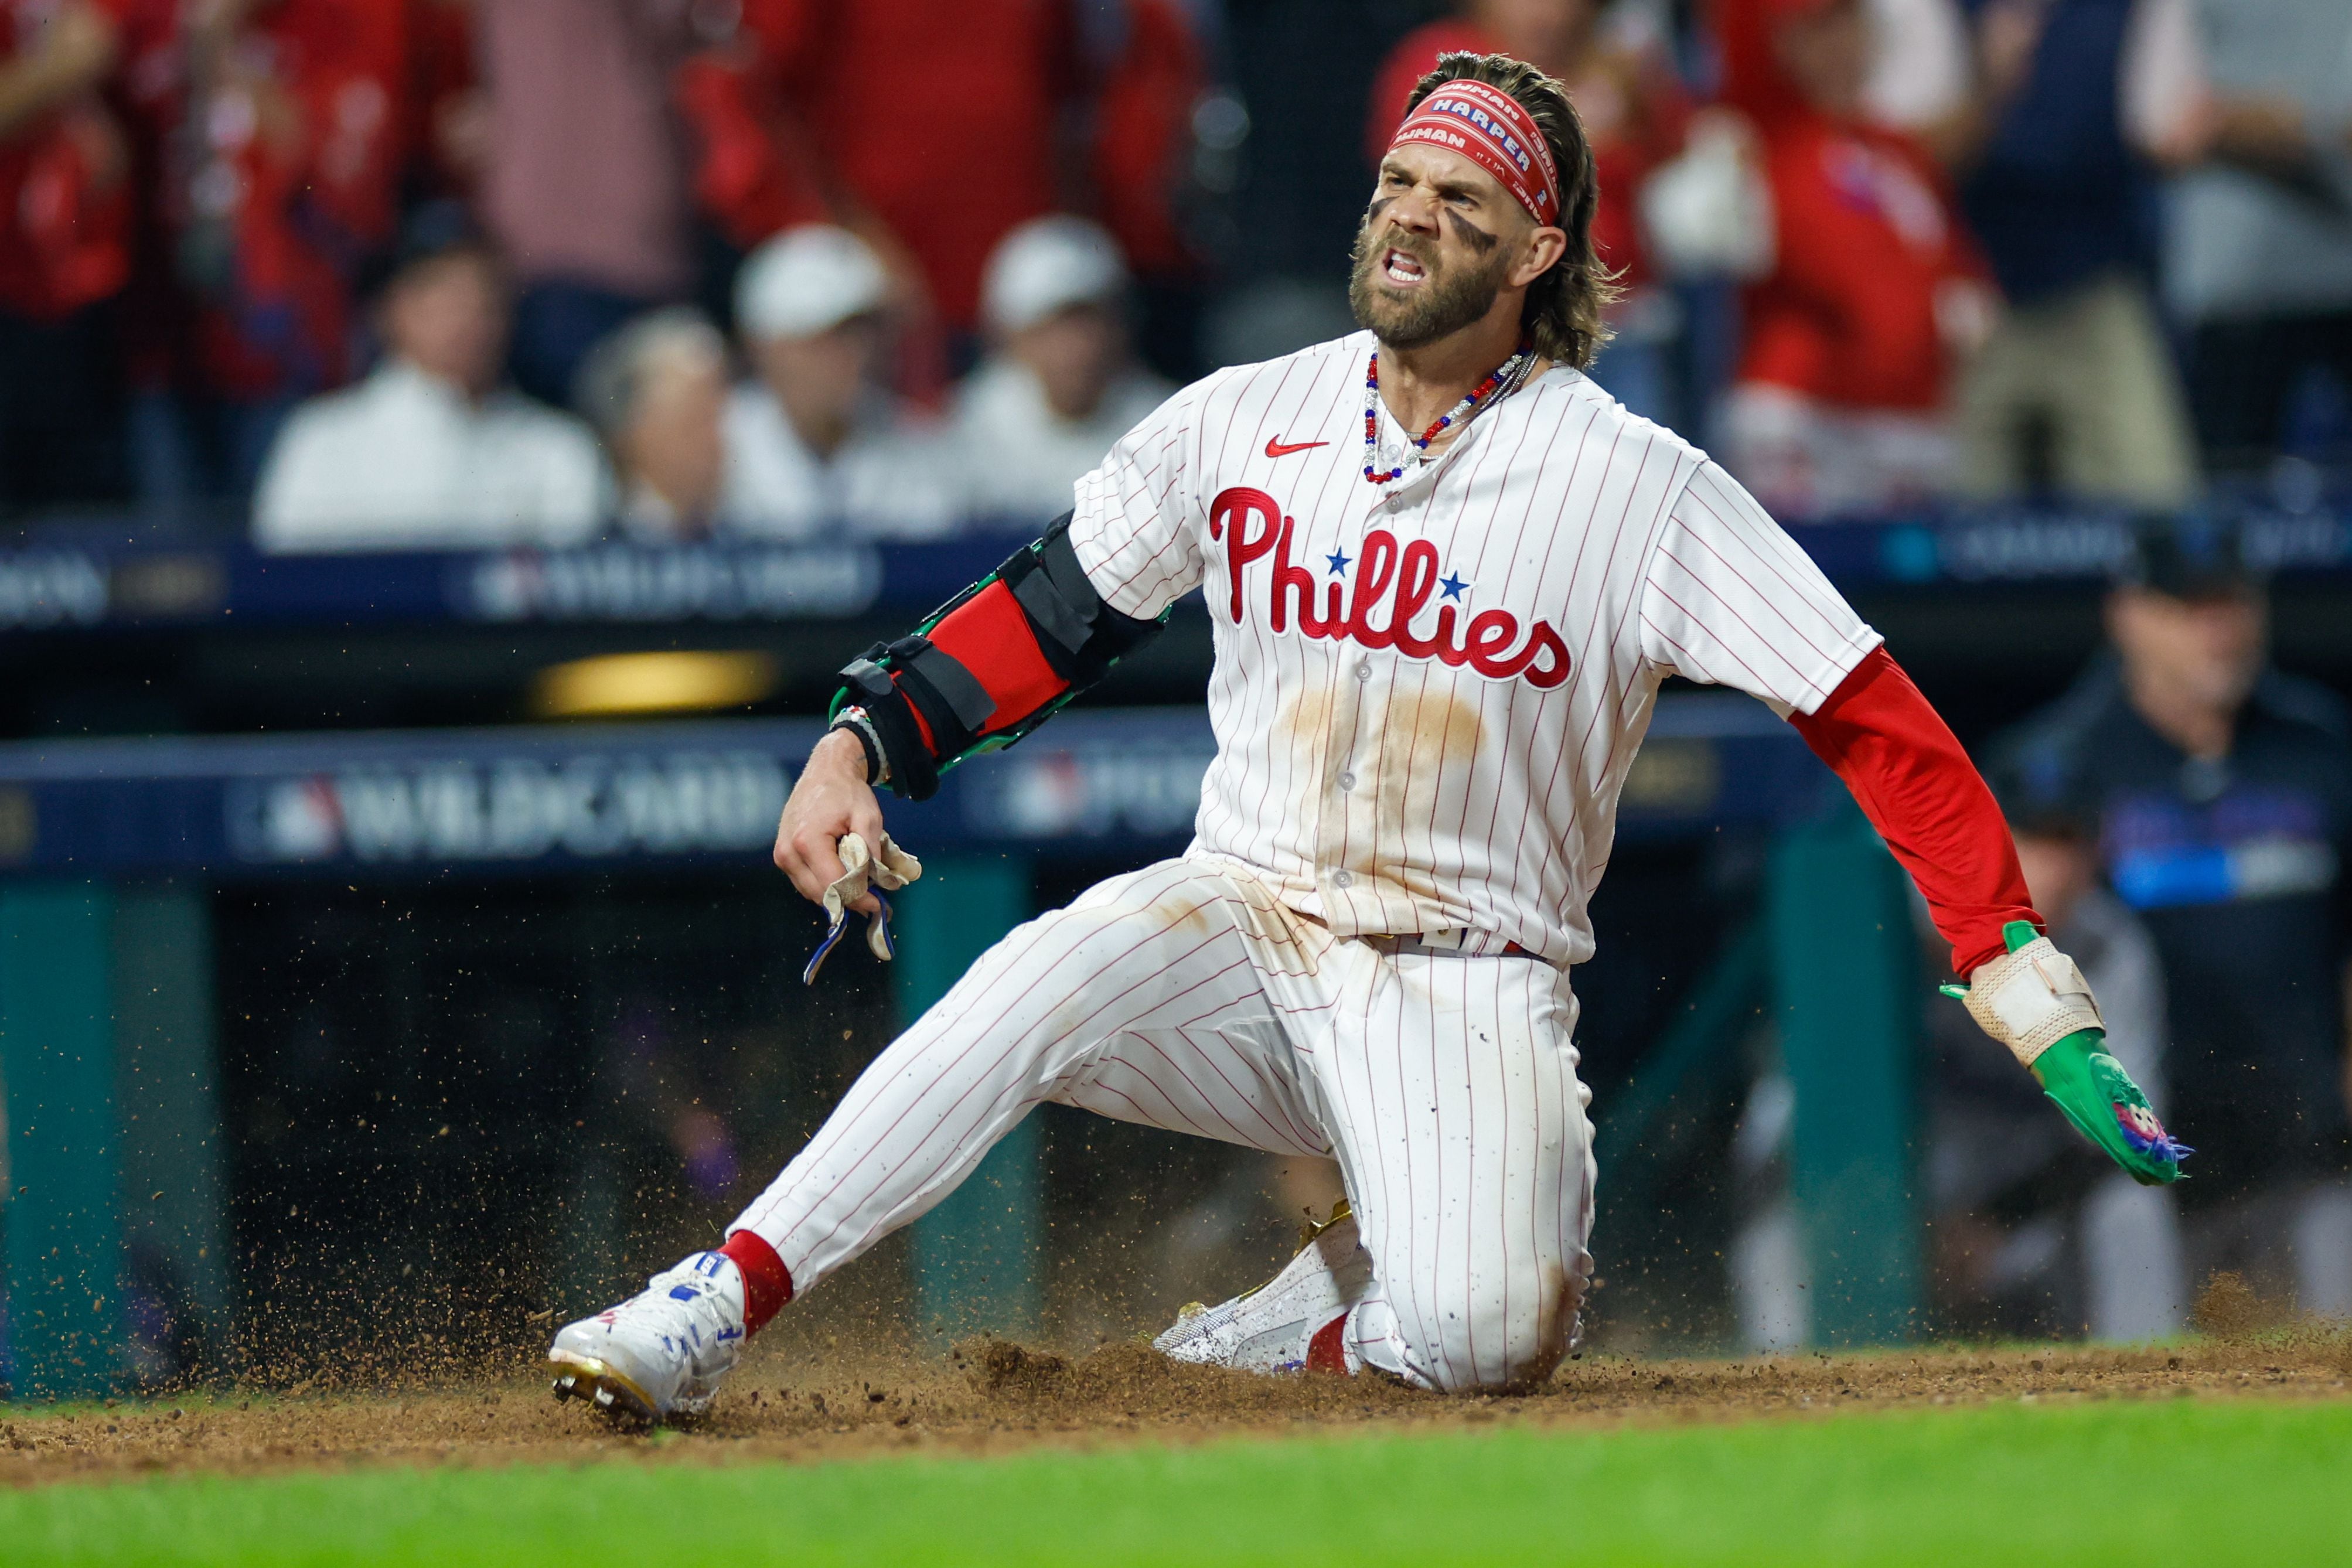 How to Watch Phillies vs. Marlins NL Wild Card Game 2: Streaming & TV Info